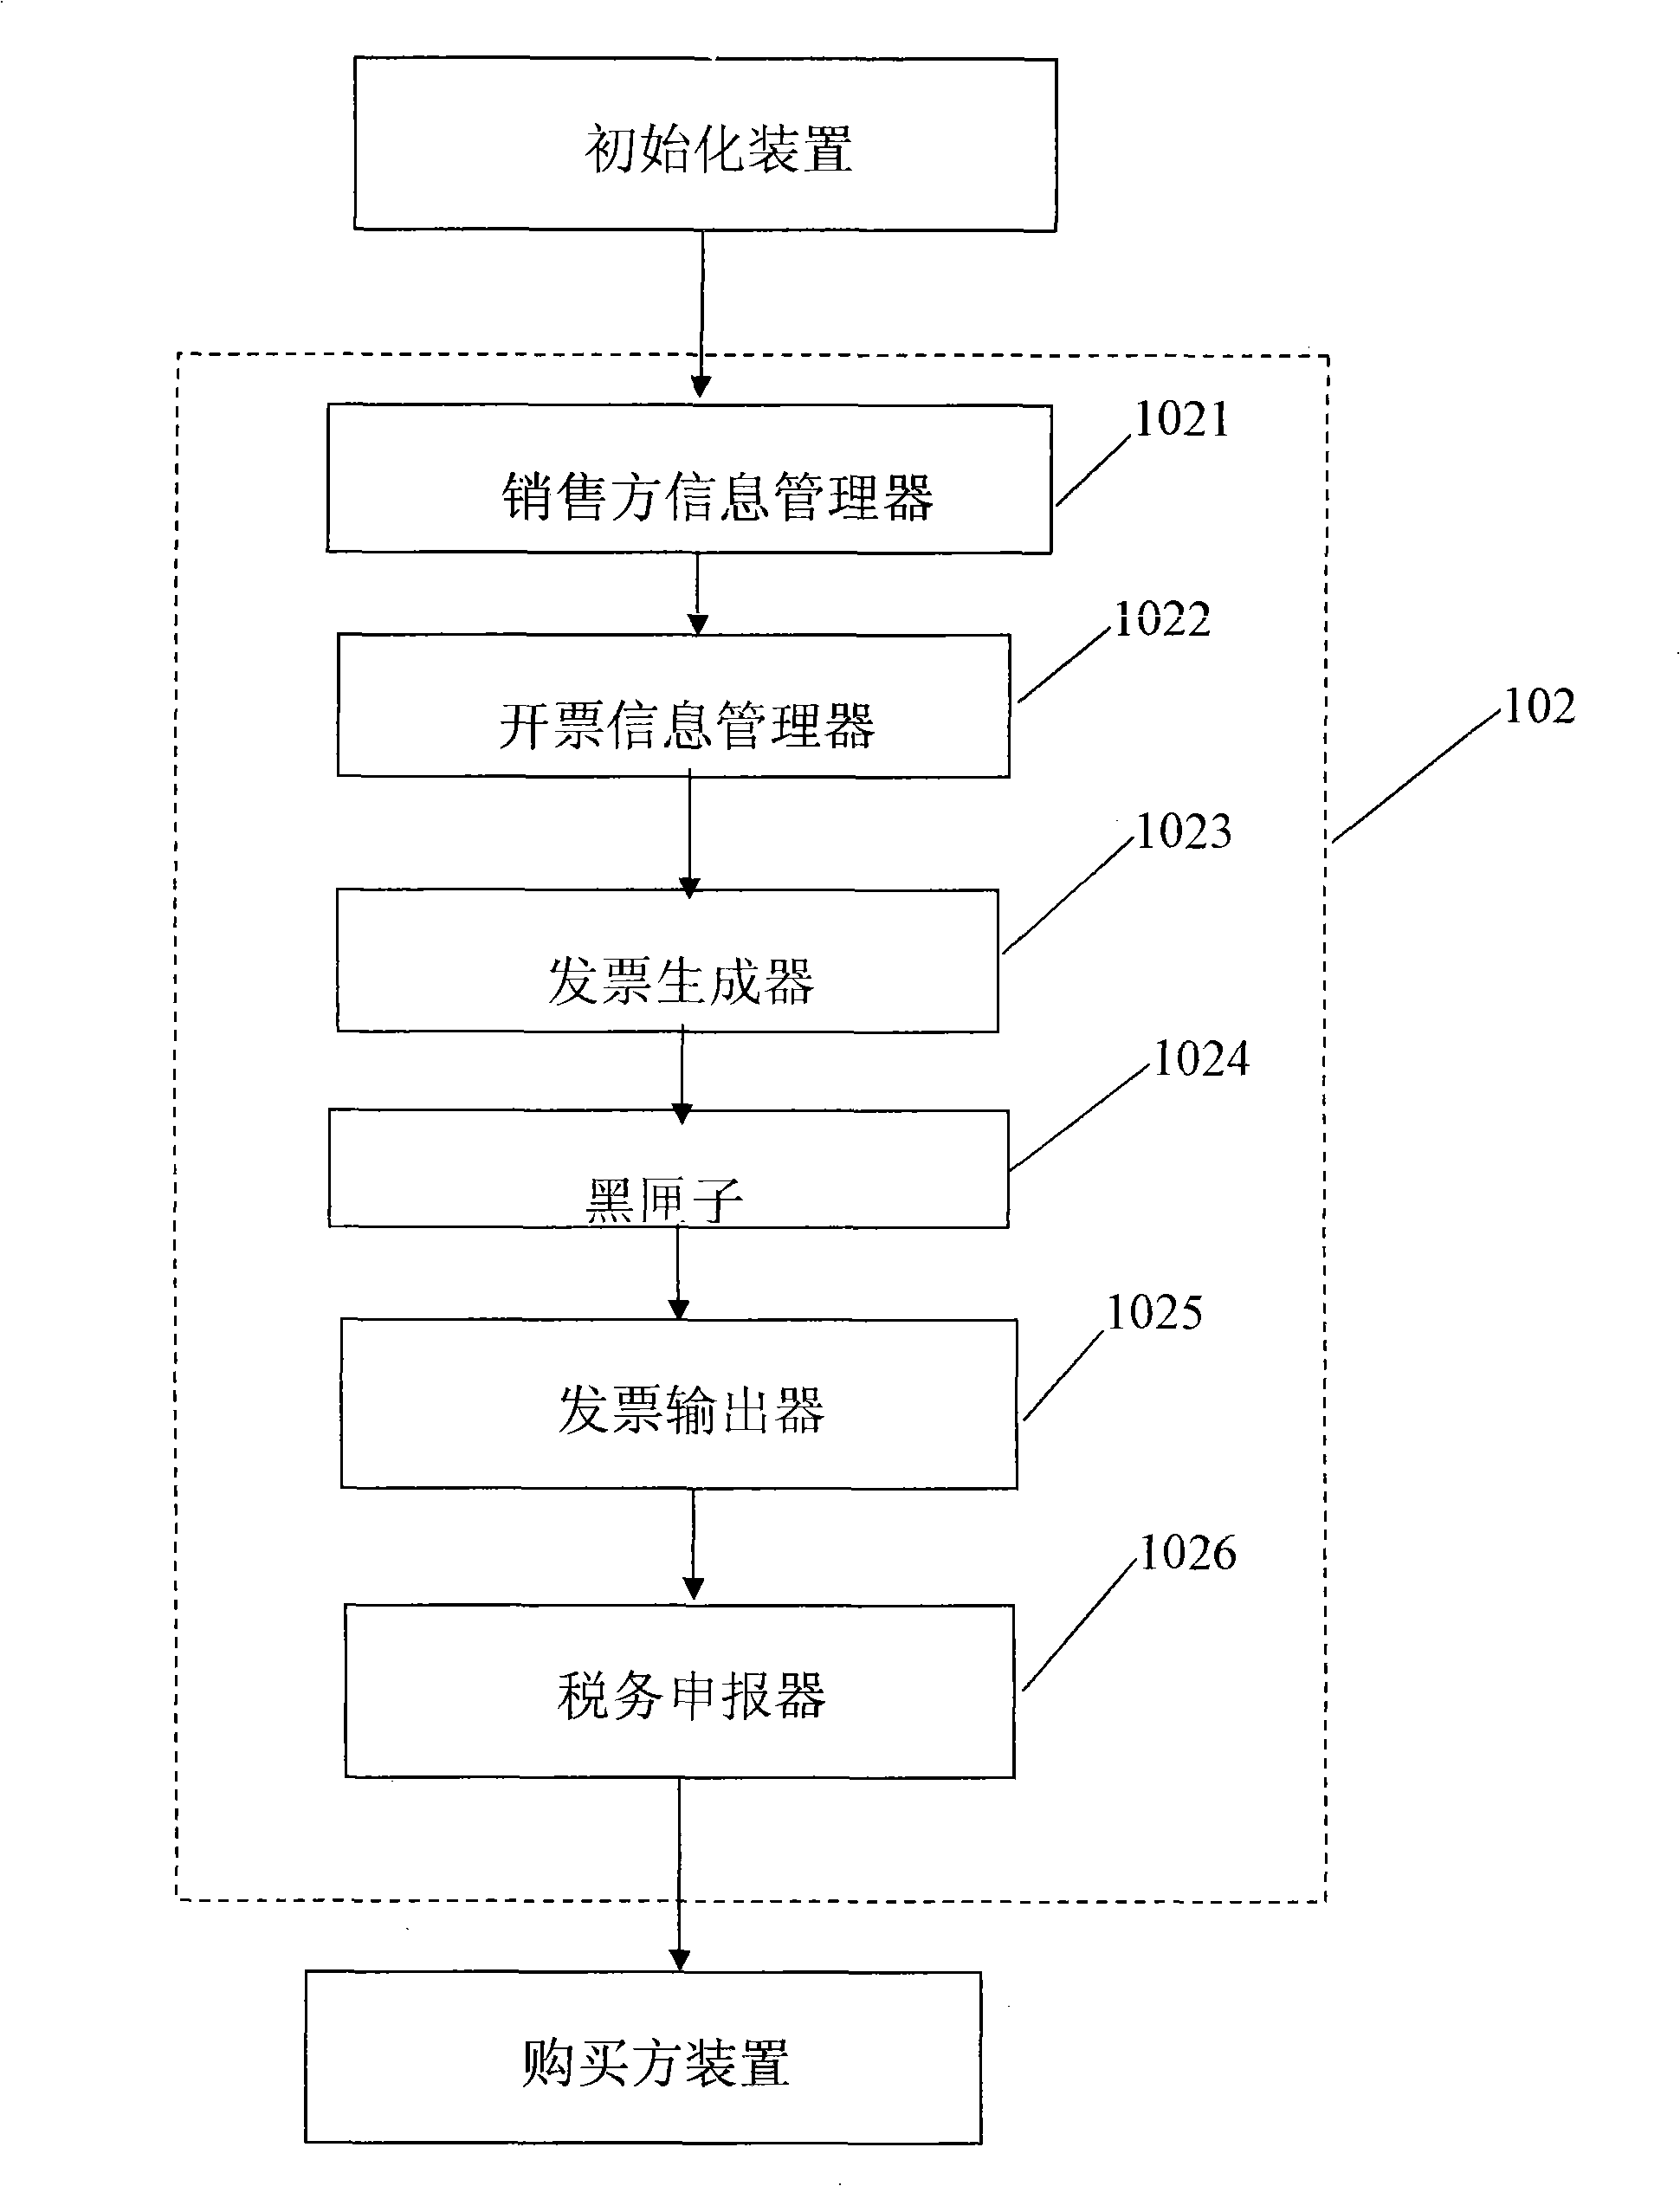 Electronic invoice and taxation expropriation and management system and method